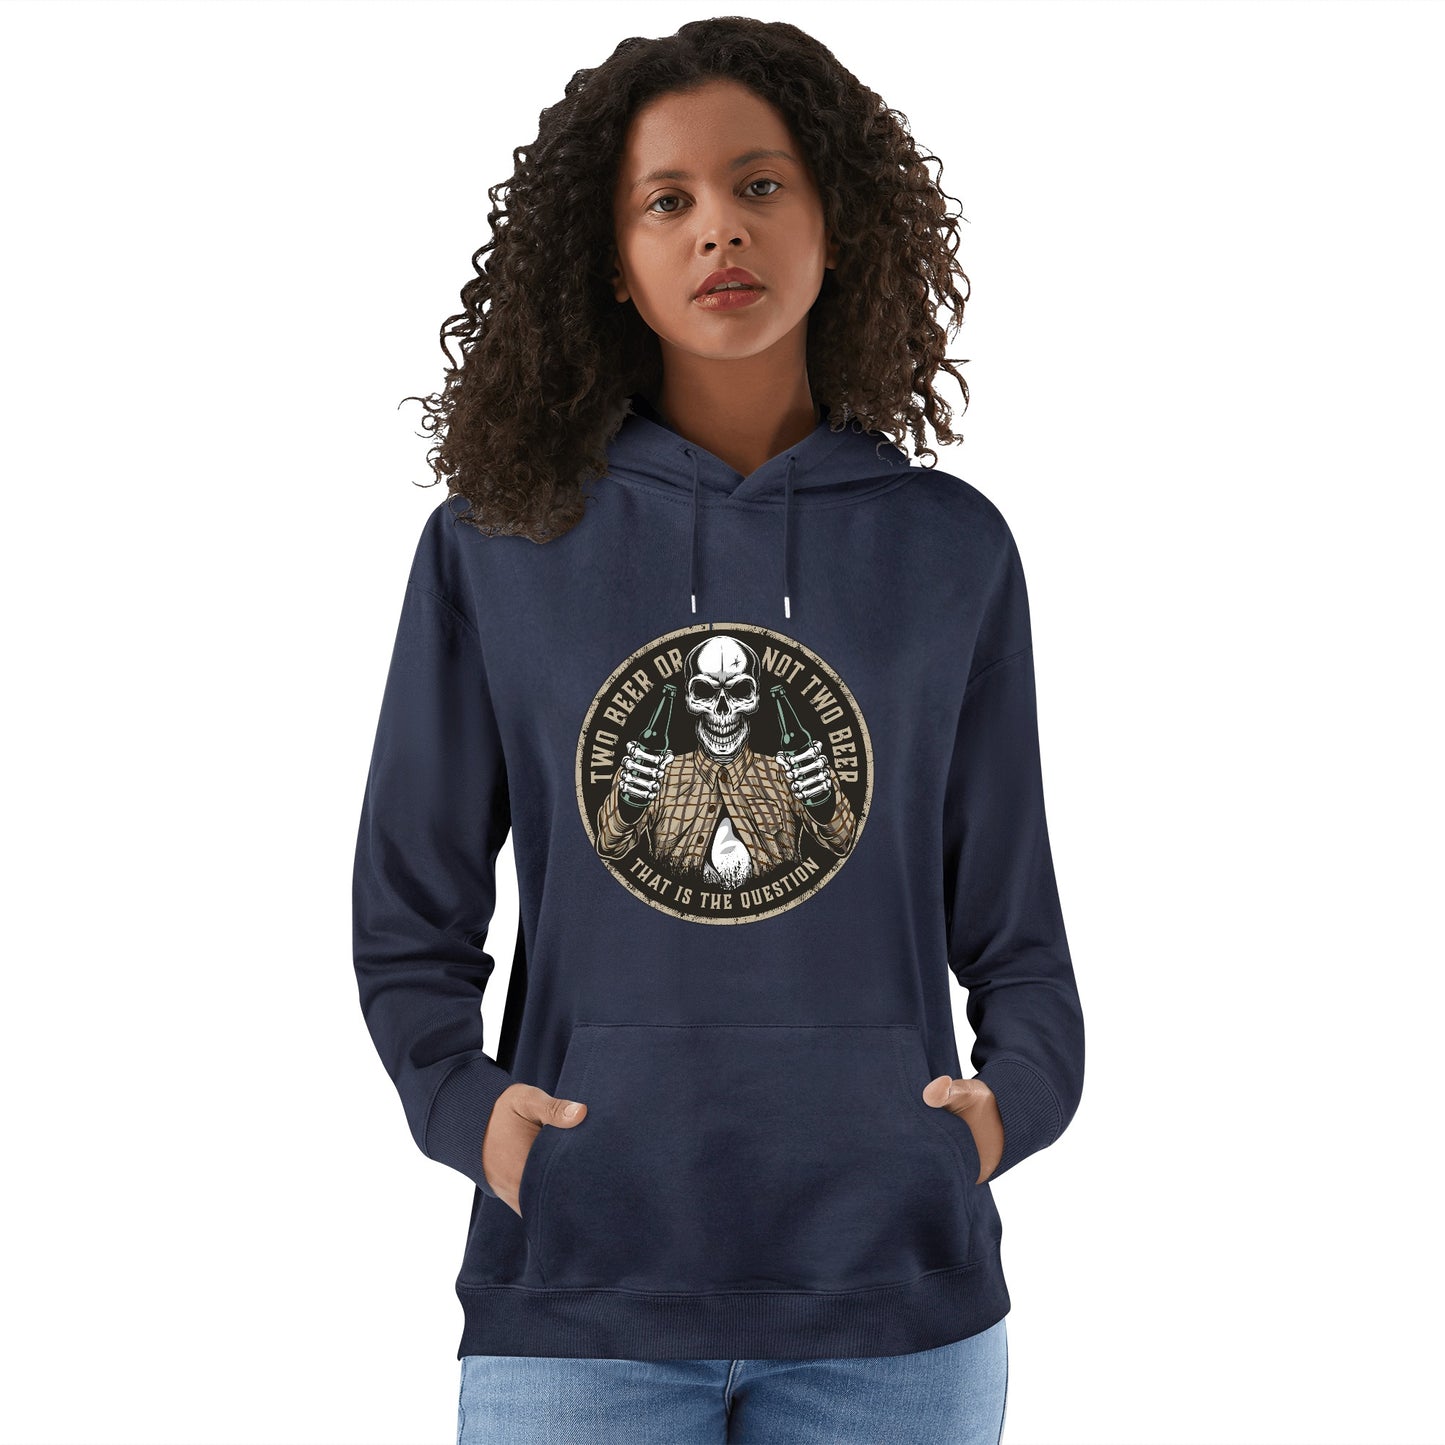 Hoodie Cotton two beer or not two beer that is the question DrinkandArt